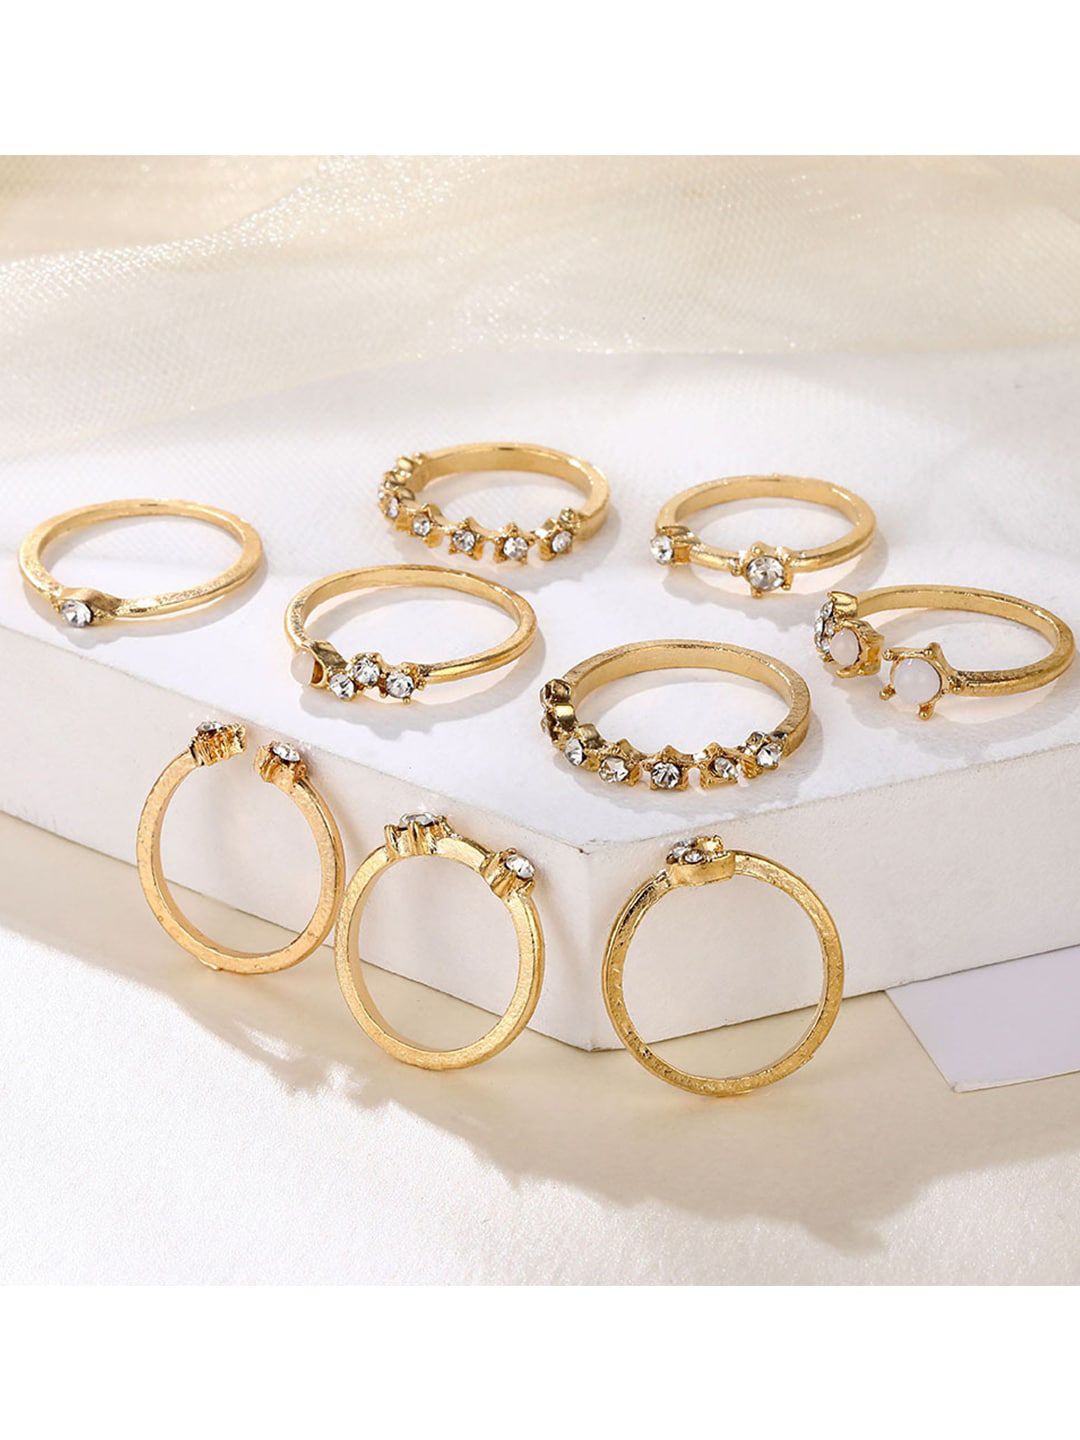 ToniQ Set Of 9 Gold-Plated Stone Embellished Adjustable Finger Rings Price in India